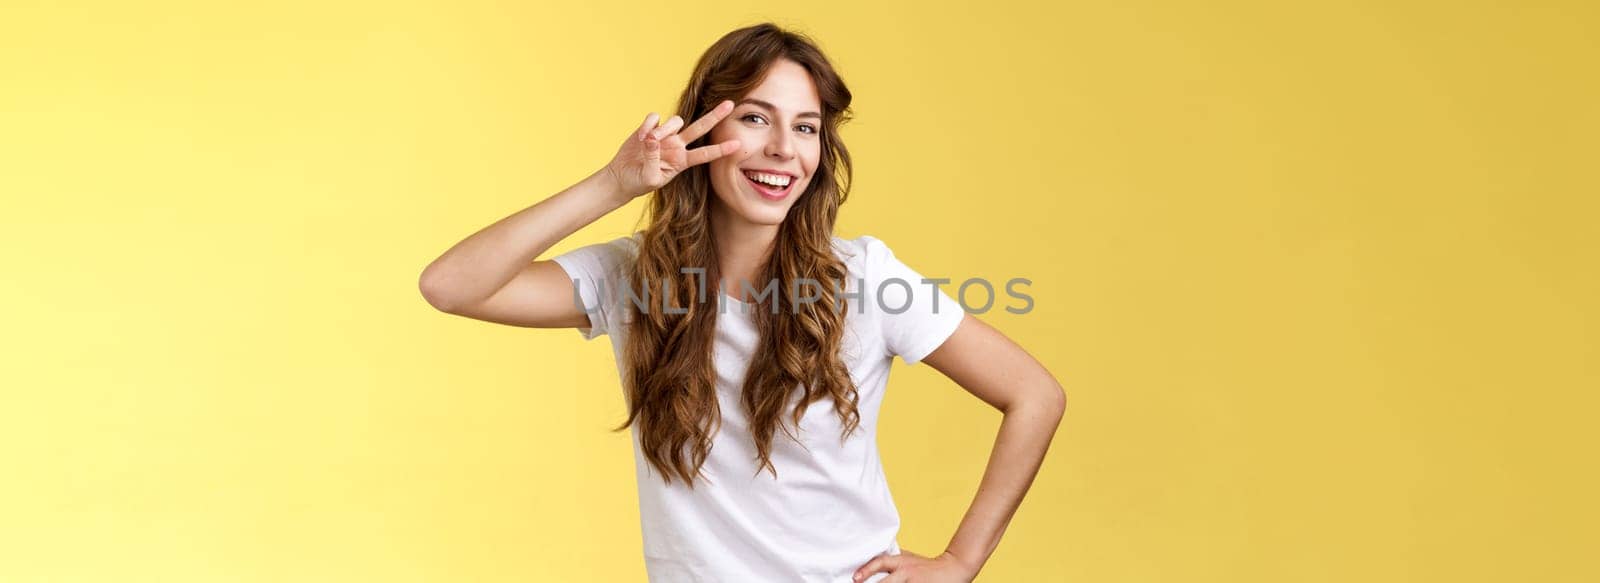 Girl having fun feel happy enthusiastic enjoy perfect summer day share positivity upbeat mood show peace victory sign near cheek tilt head smiling silly carefree stand yellow background. Lifestyle.